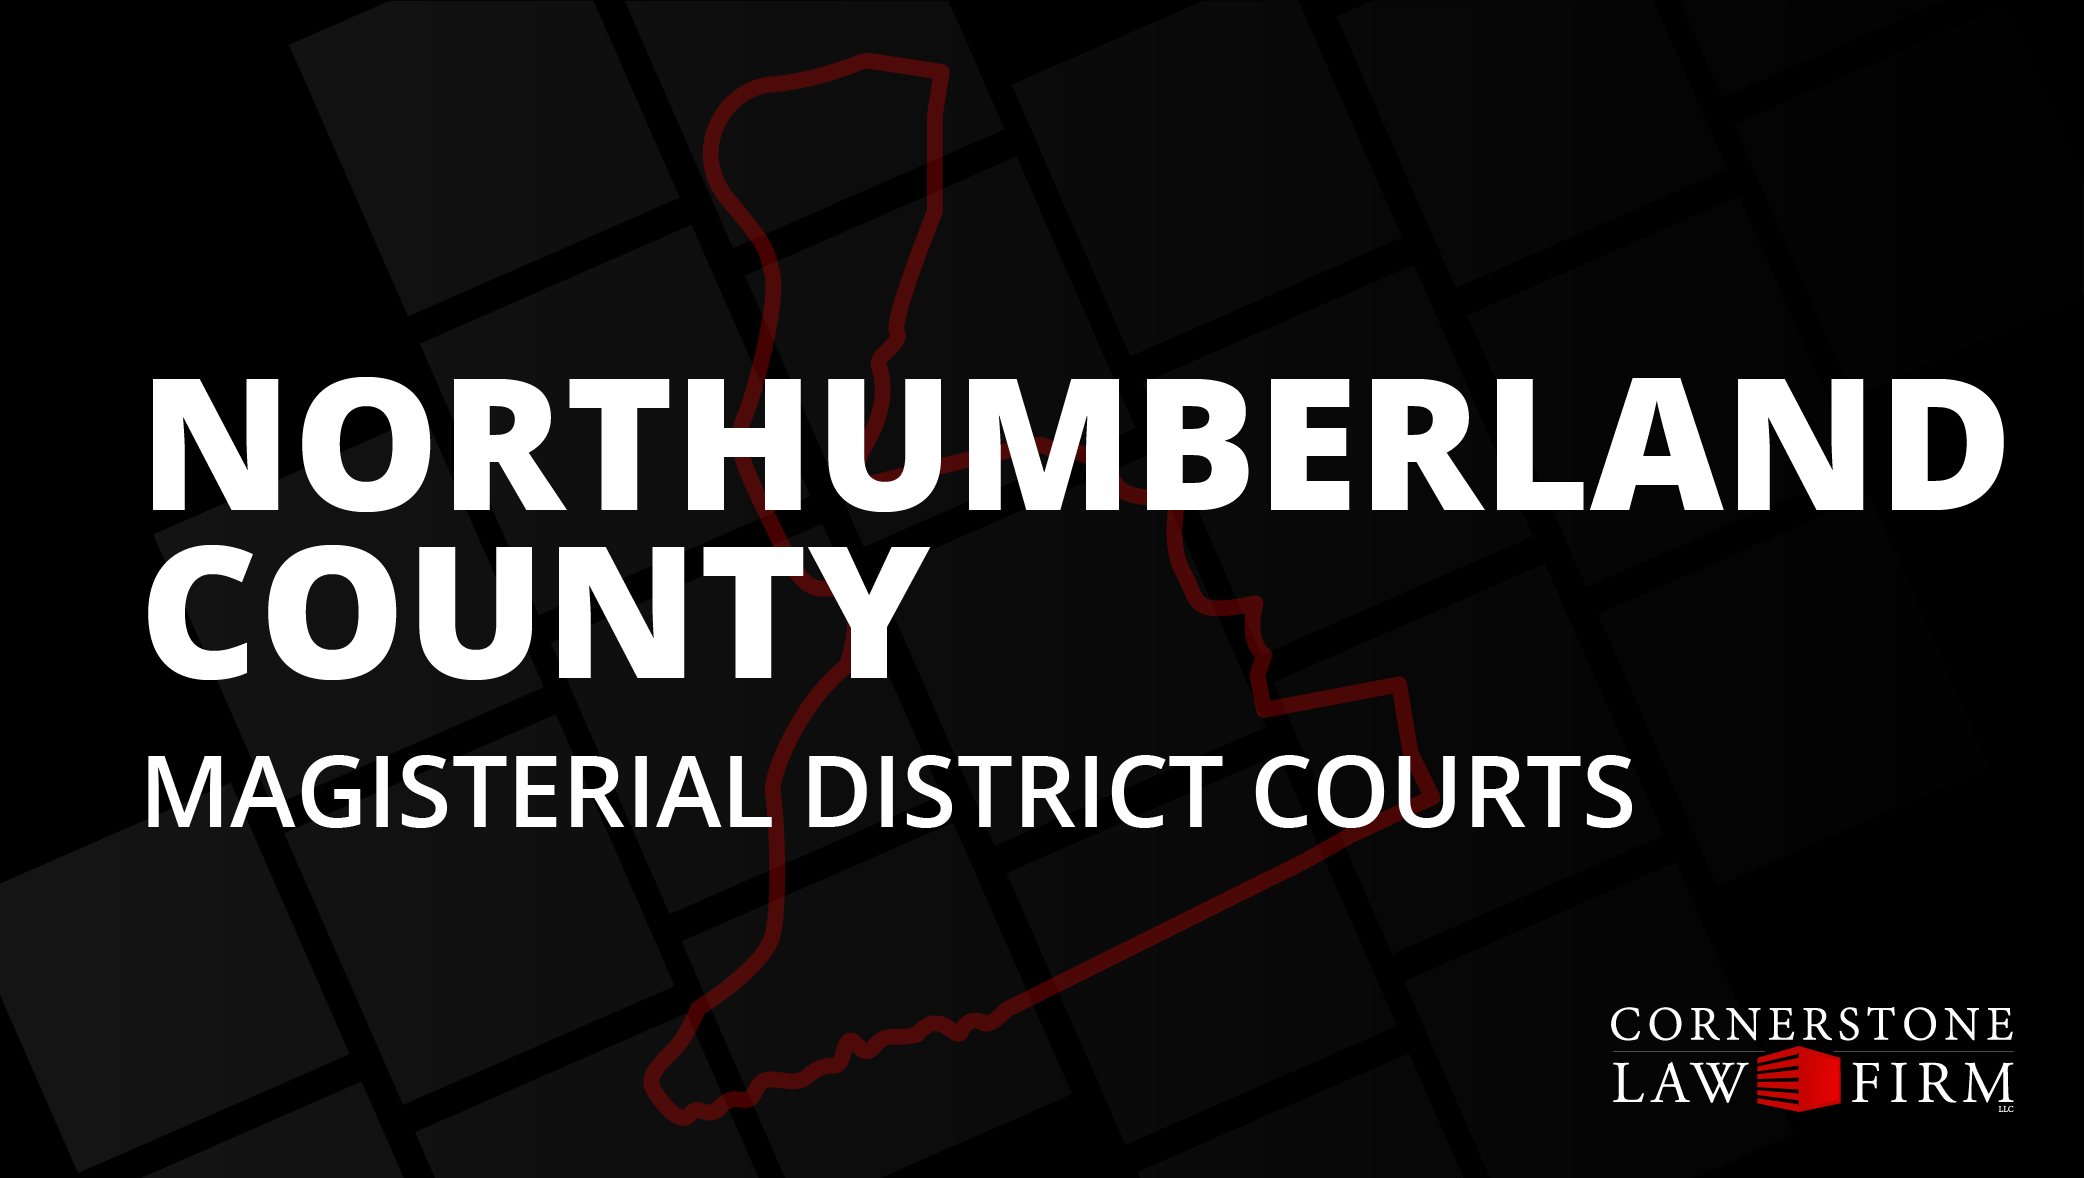 The words "Northumberland County Magisterial District Courts" over a black background with a faded red outline of the county.